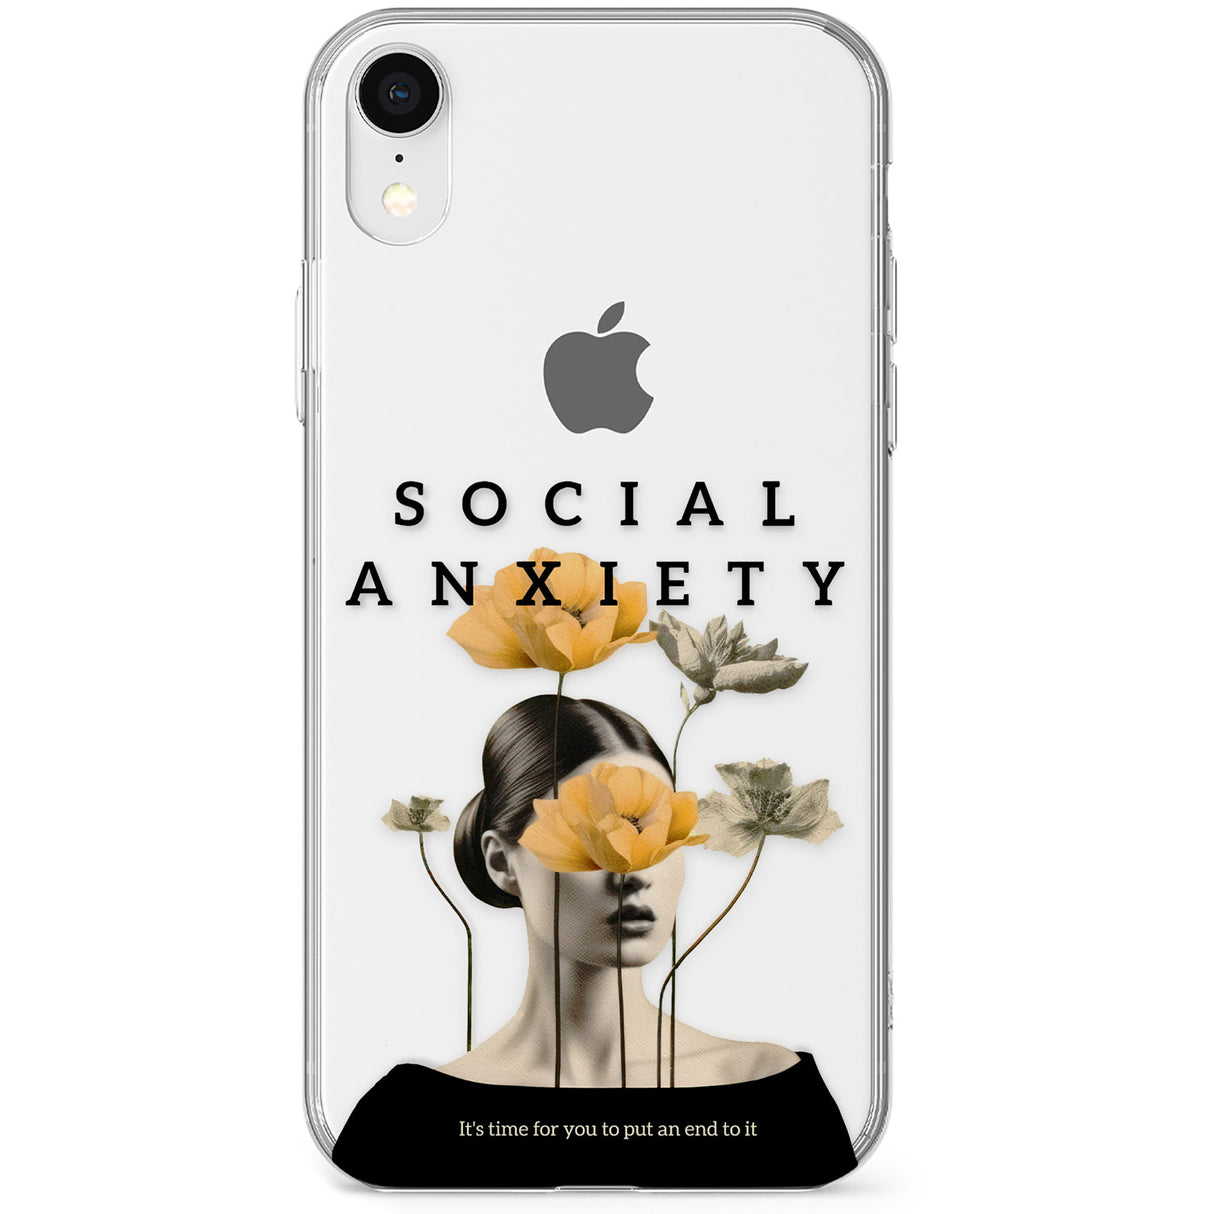 Social Anxiety Phone Case for iPhone X, XS Max, XR